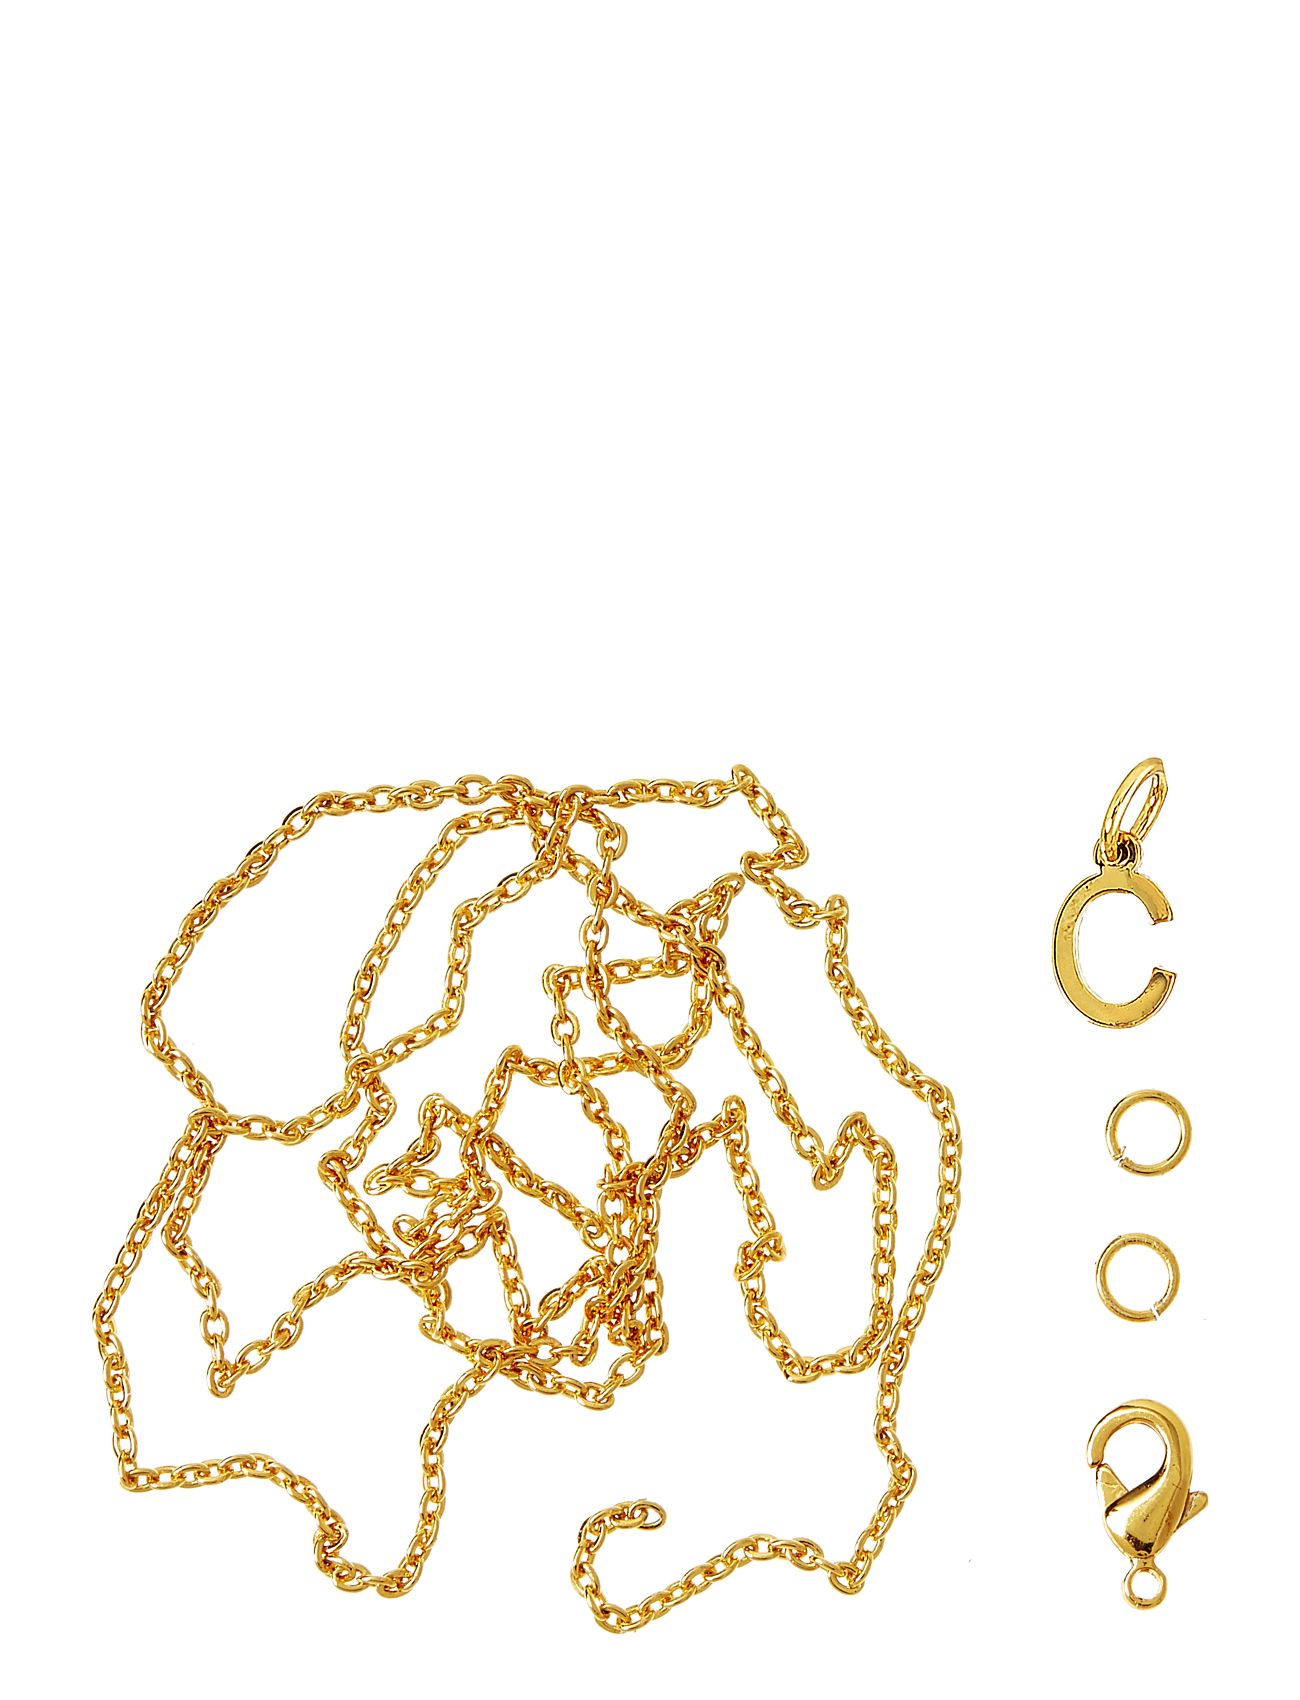 Letter C Gp With O-Ring, Chain And Clasp Toys Creativity Drawing & Crafts Craft Jewellery & Accessories Gold Me & My Box